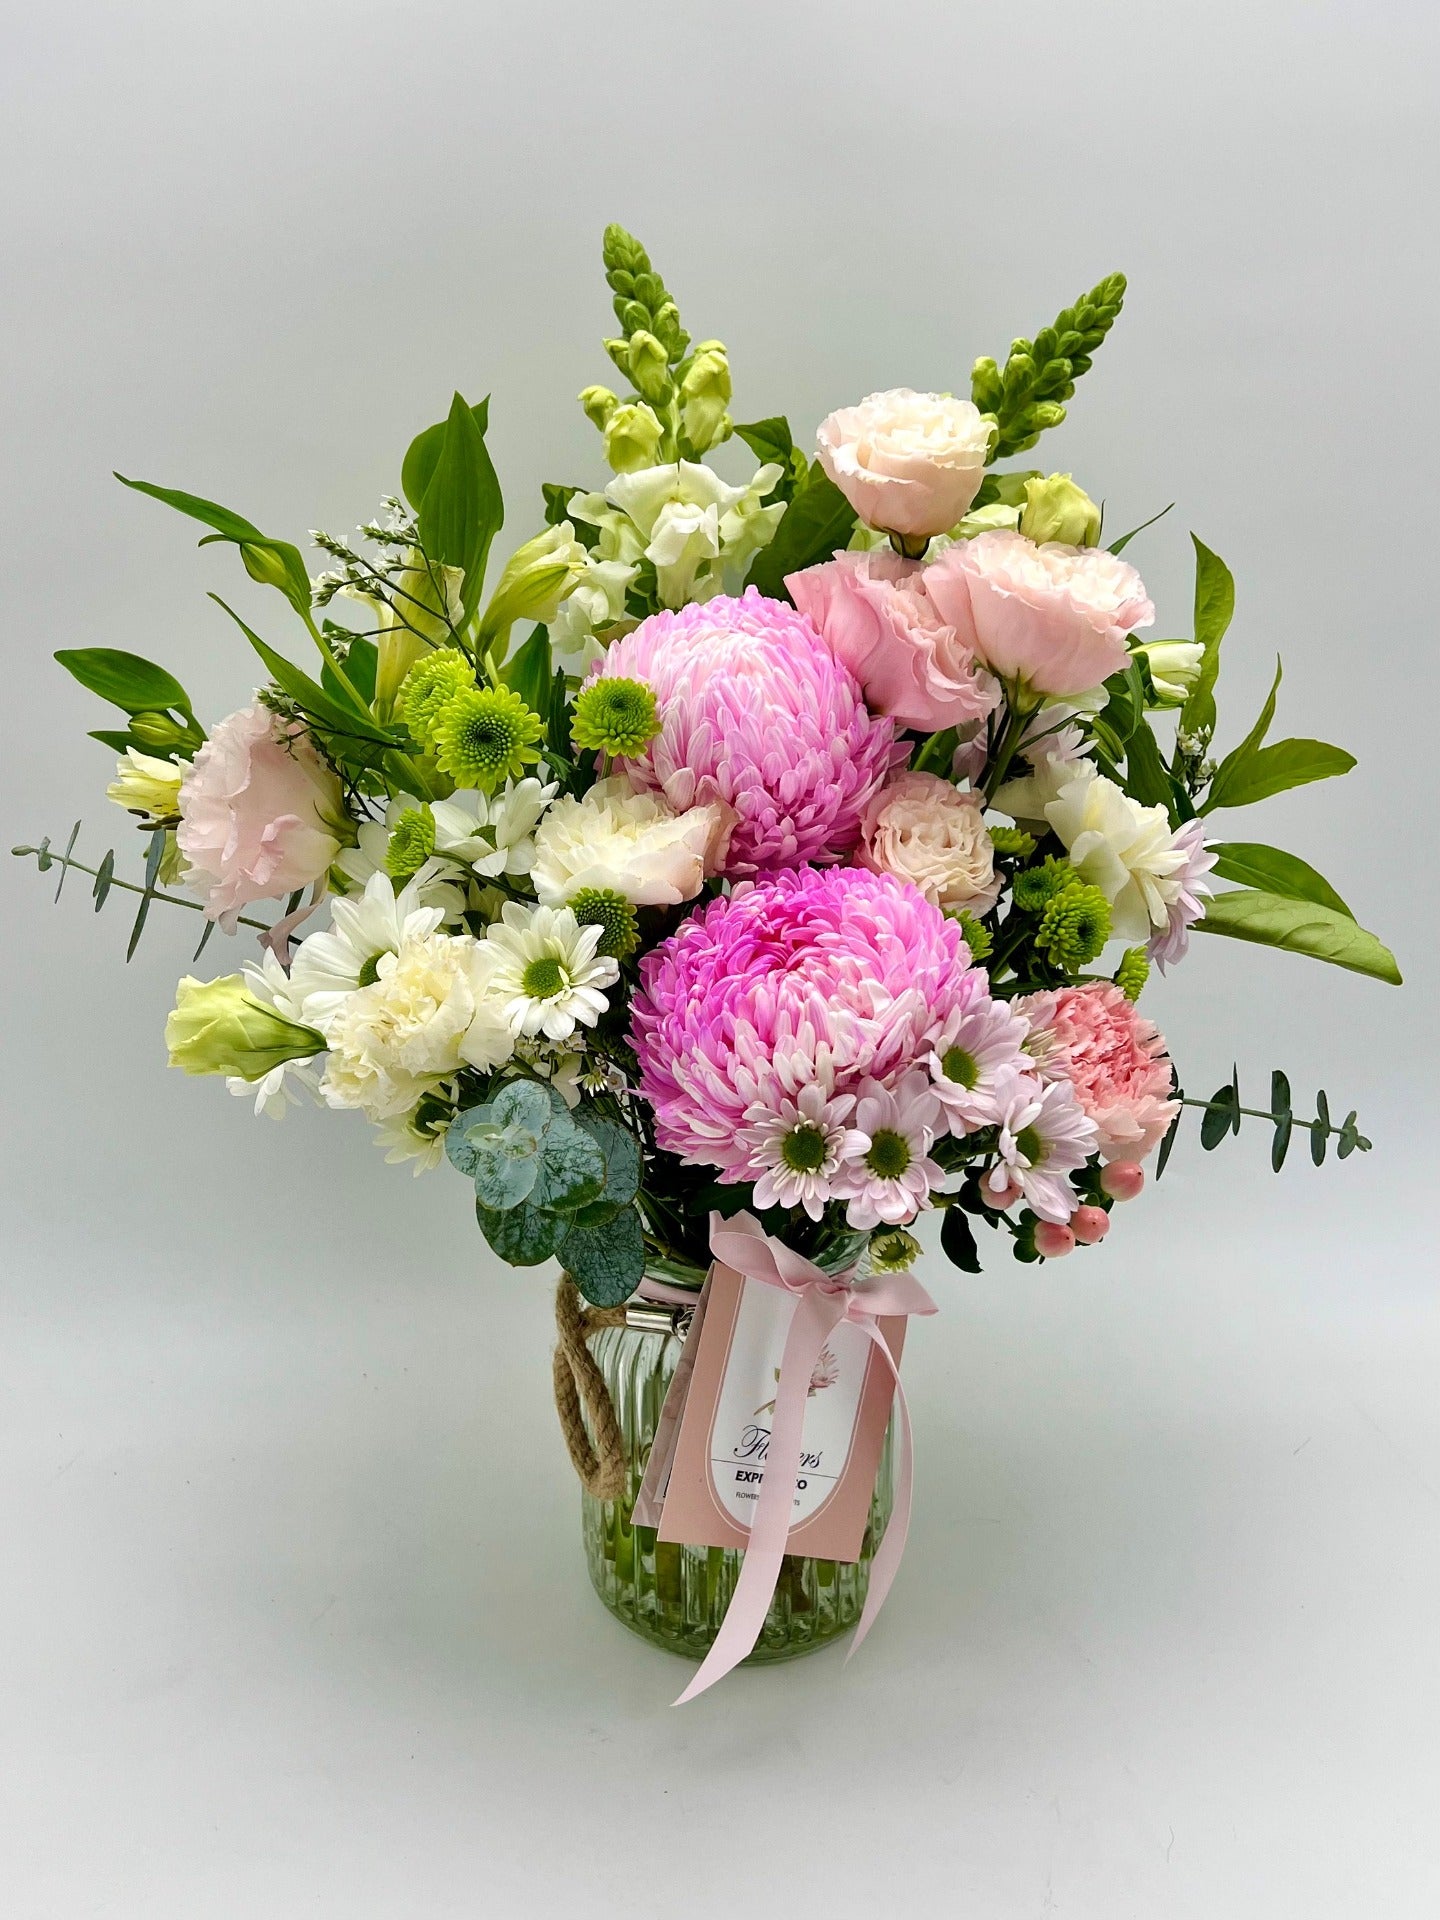 A pink and white flowers bouquet in a vase, made in Melbourne by the florist at Flowers Express Co.